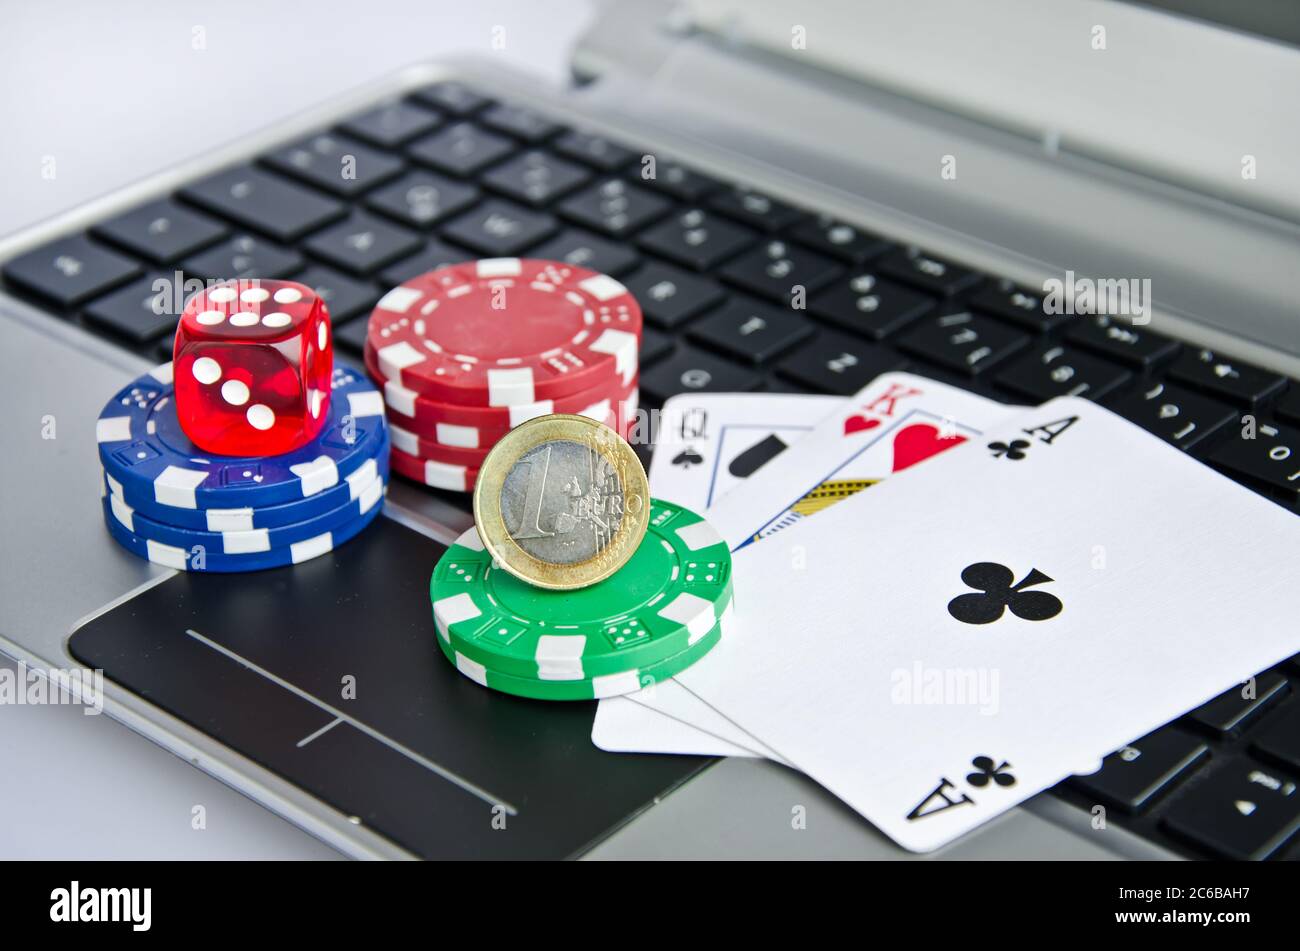 Playing cards, casino chips and Euro coin on a laptop keyboard symbolizing online gambling Stock Photo